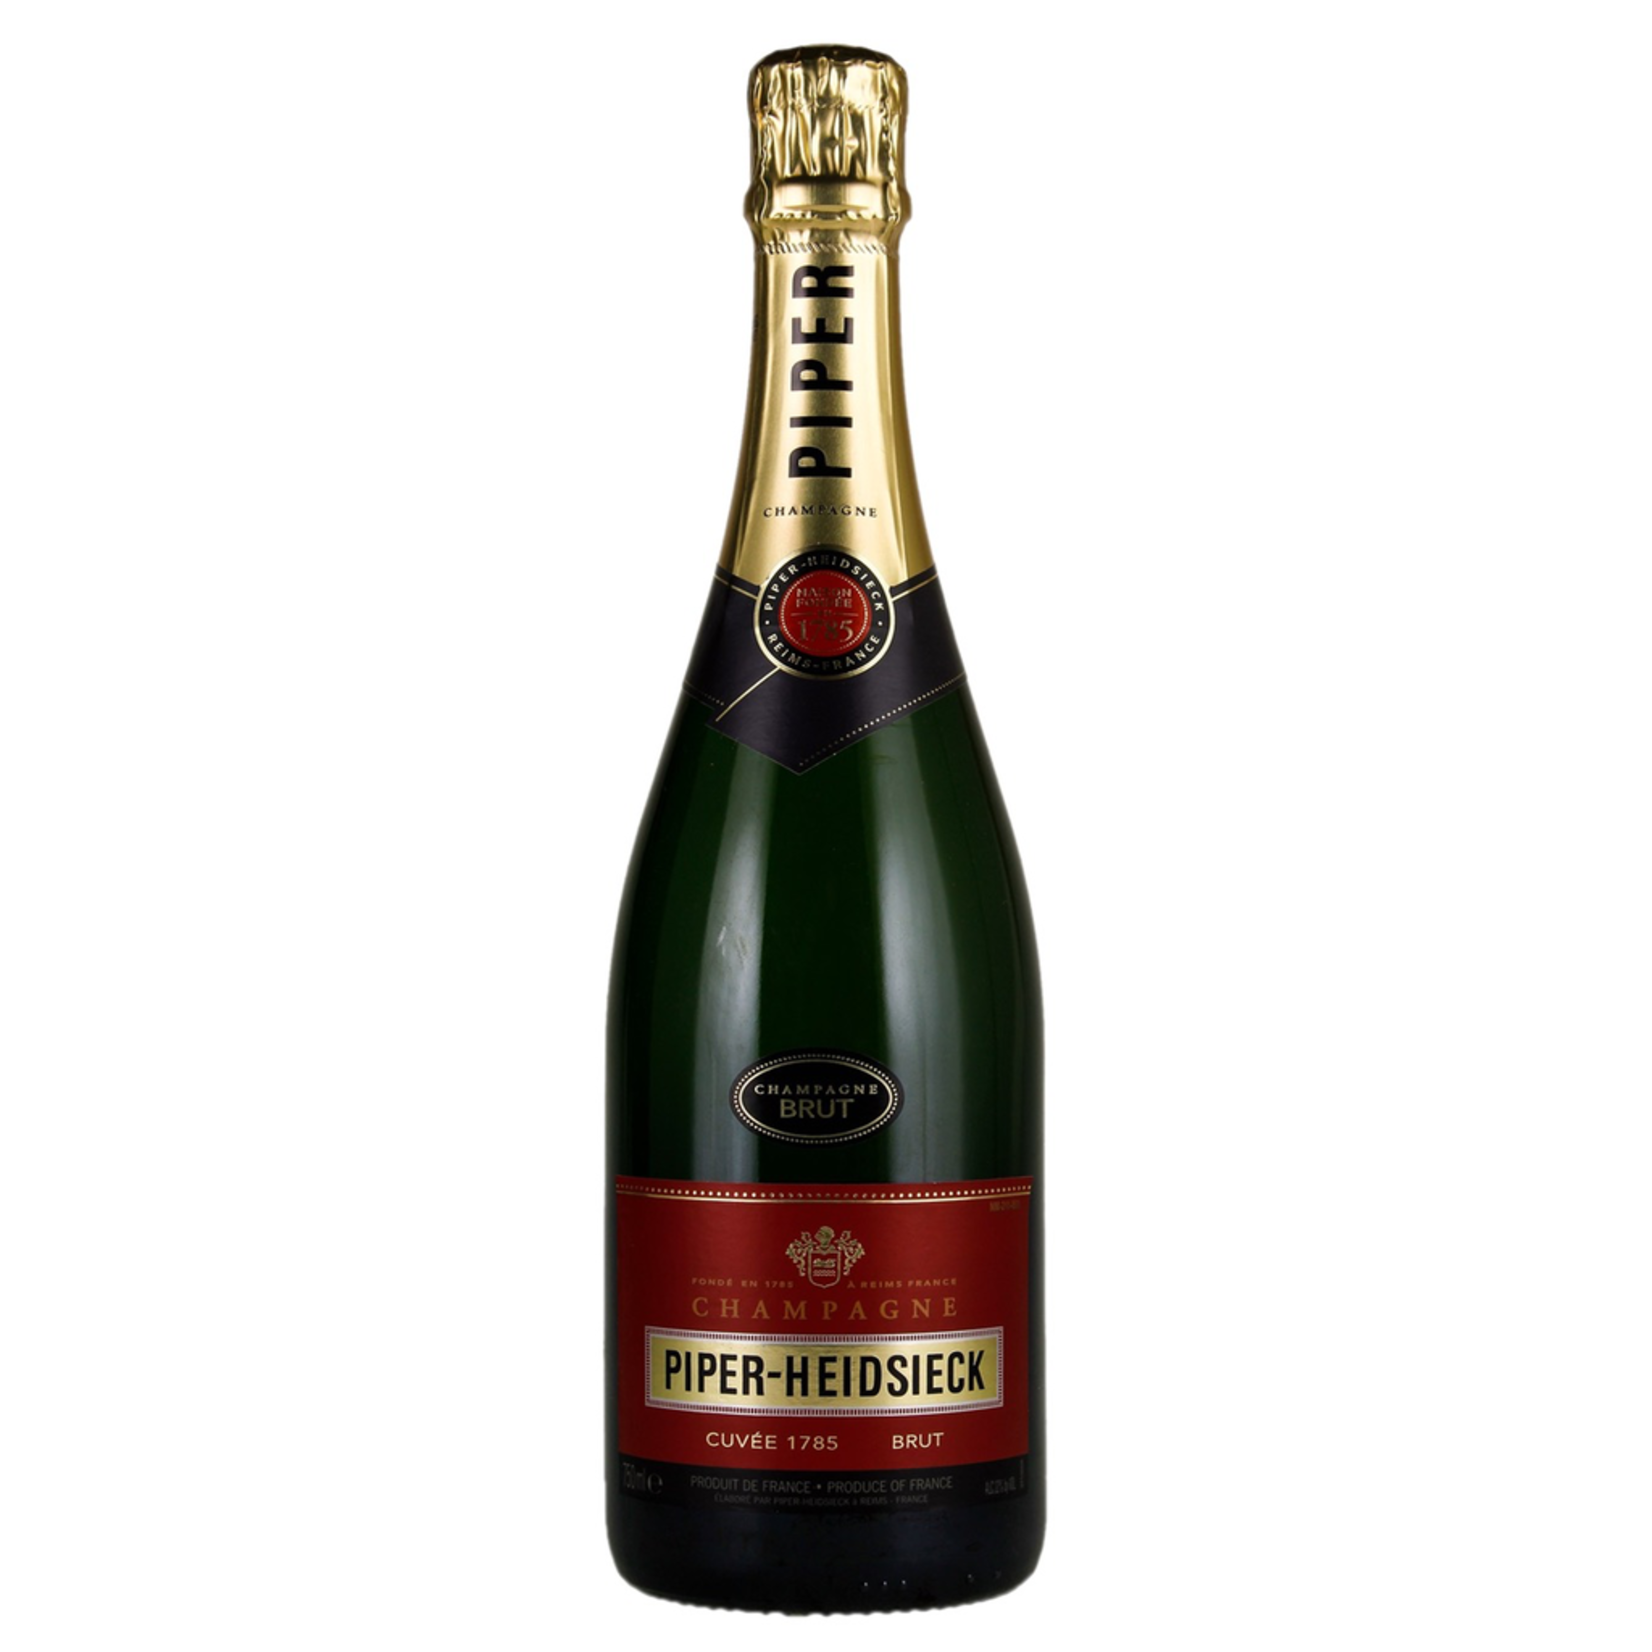 NV, Piper Heidsieck Cuvee 1785, Brut Champagne, Reims, Champagne, France, 12% Alc, TW, A3,Sw2,Sm2,C4,I3